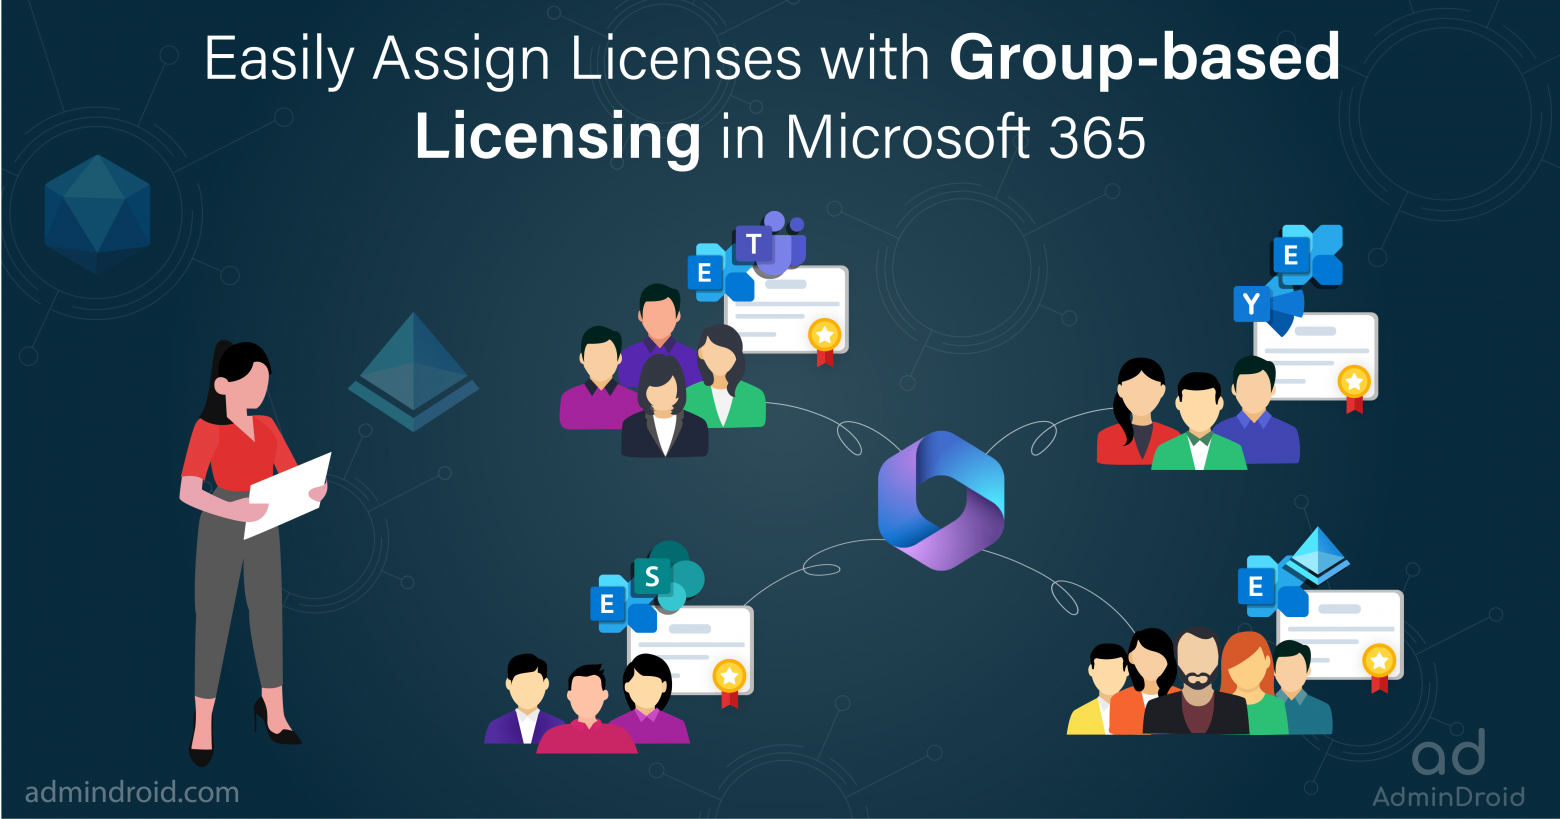 Auto-Assign Licenses with Group-based Licensing in Microsoft 365